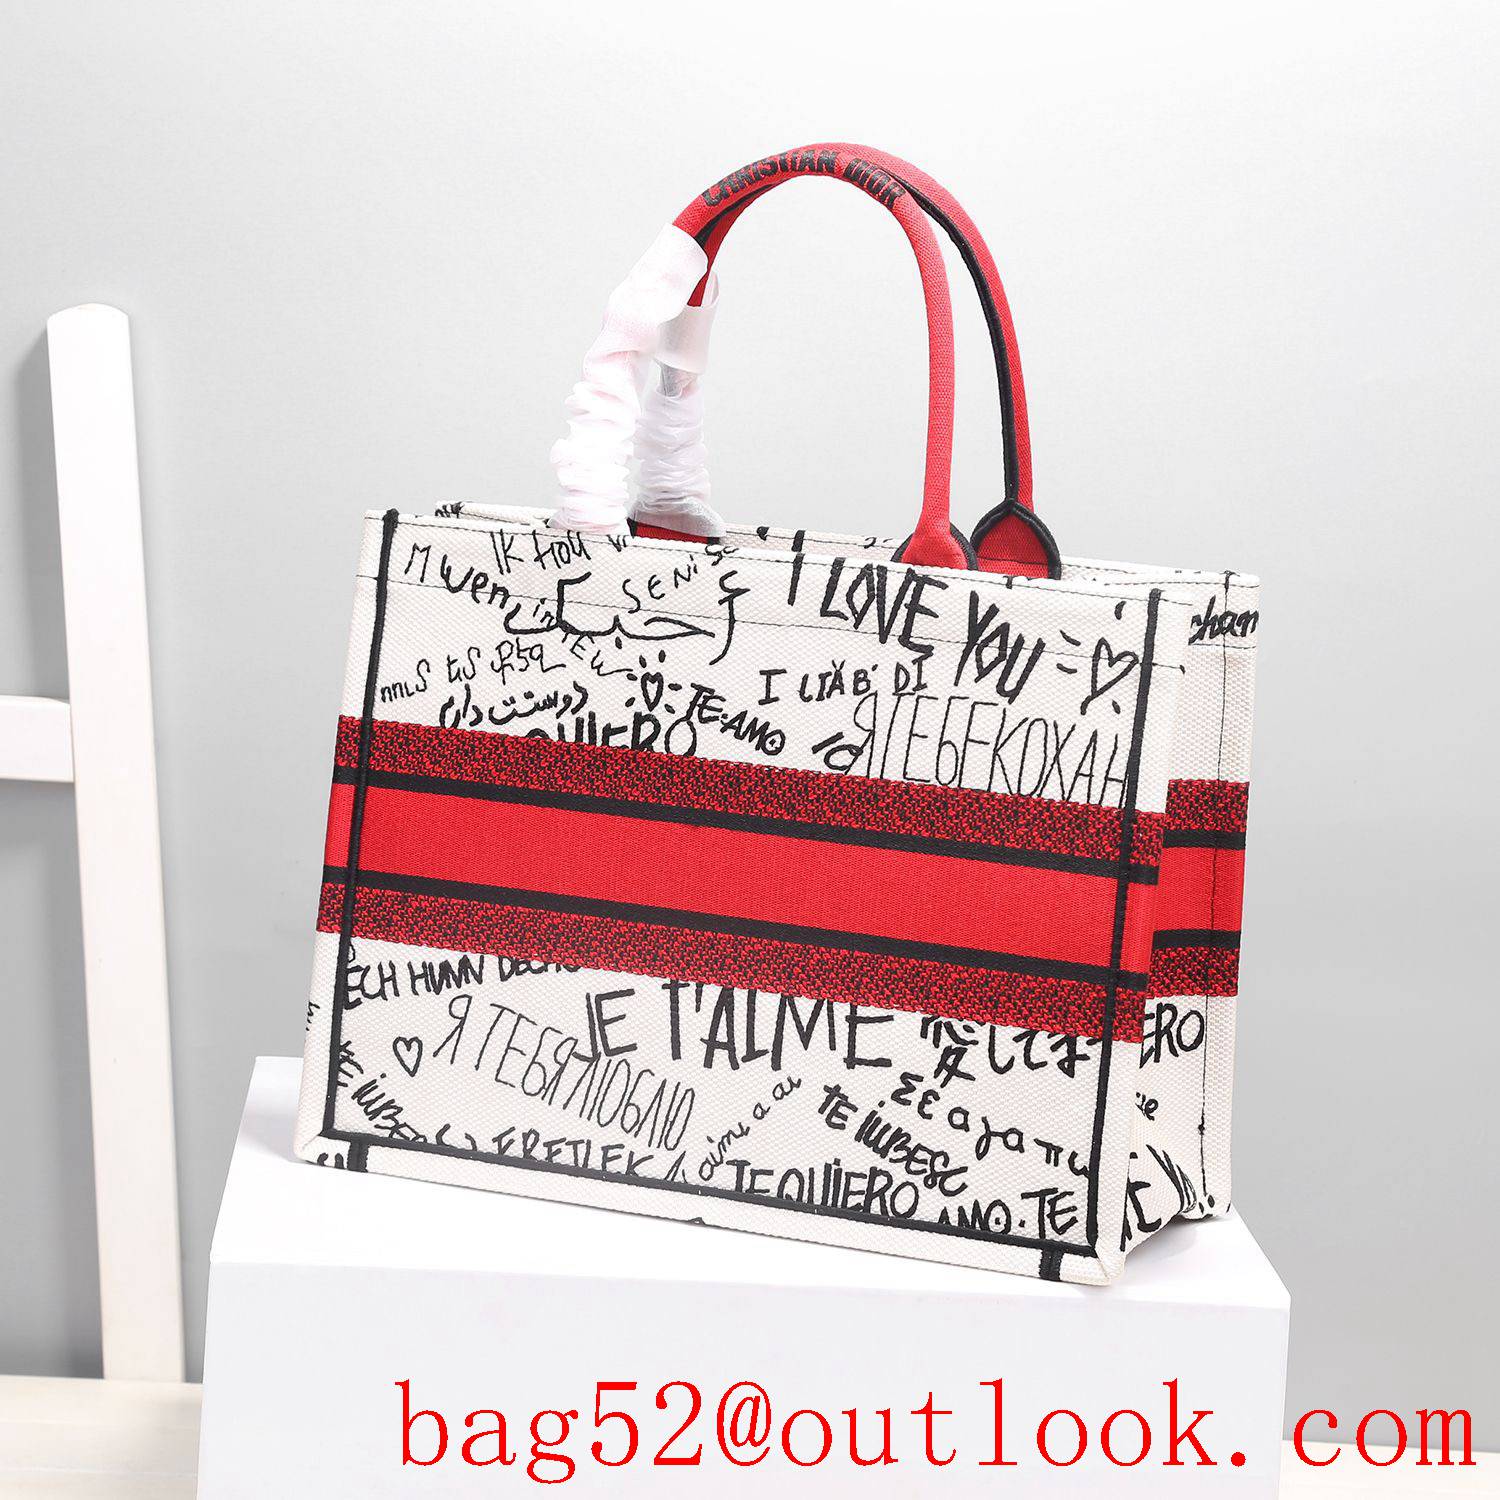 Dior red big heart Chinese Valentine's Day limited edition tote handbag